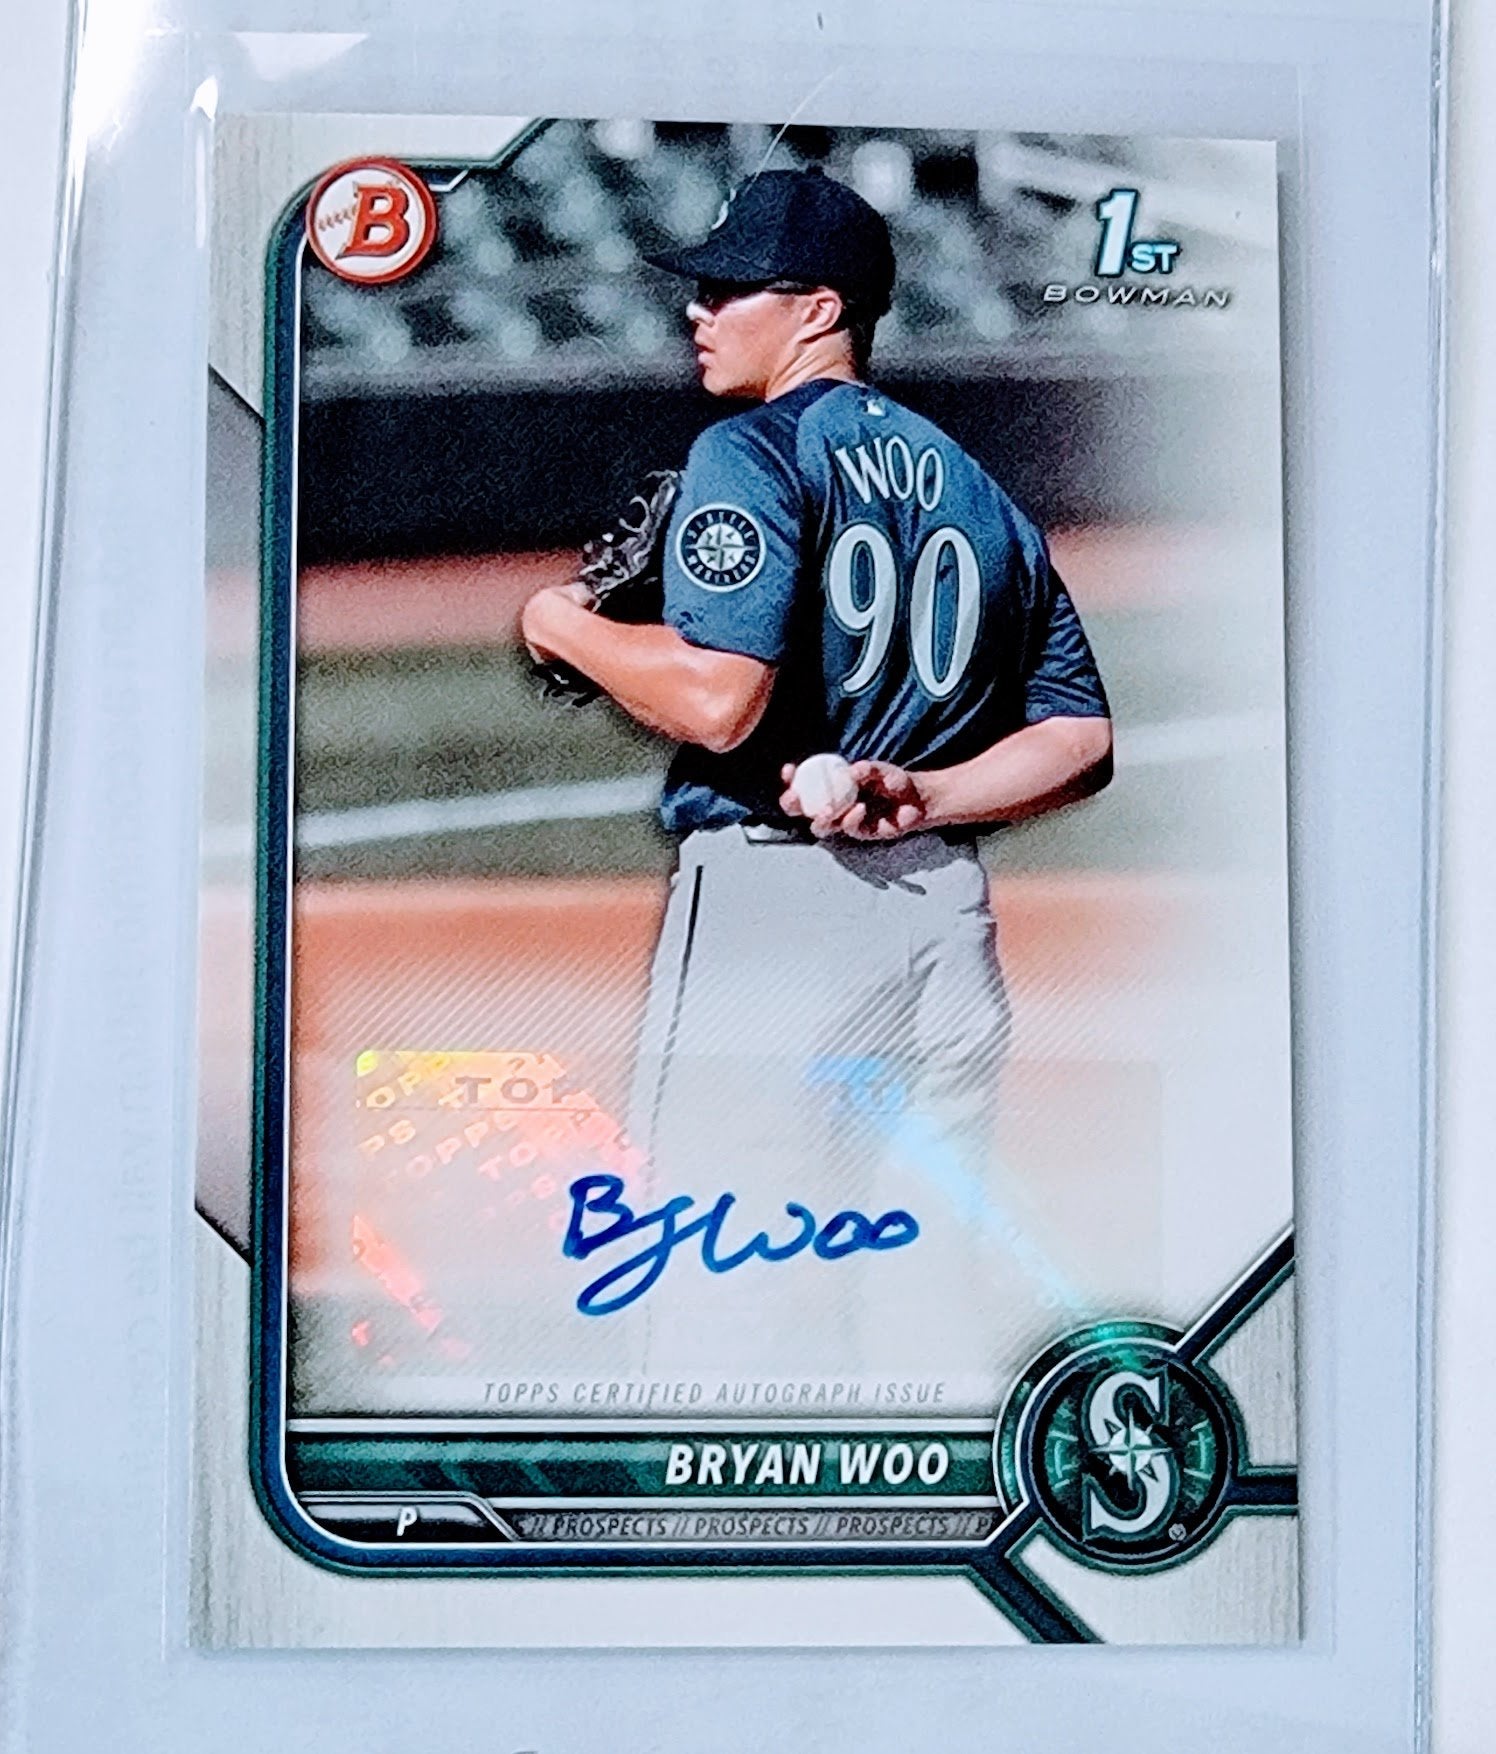 2022 Bowman Chrome Bryan Woo 1st on Bowman Prospect Autographed Baseball Trading Card GRB1 simple Xclusive Collectibles   